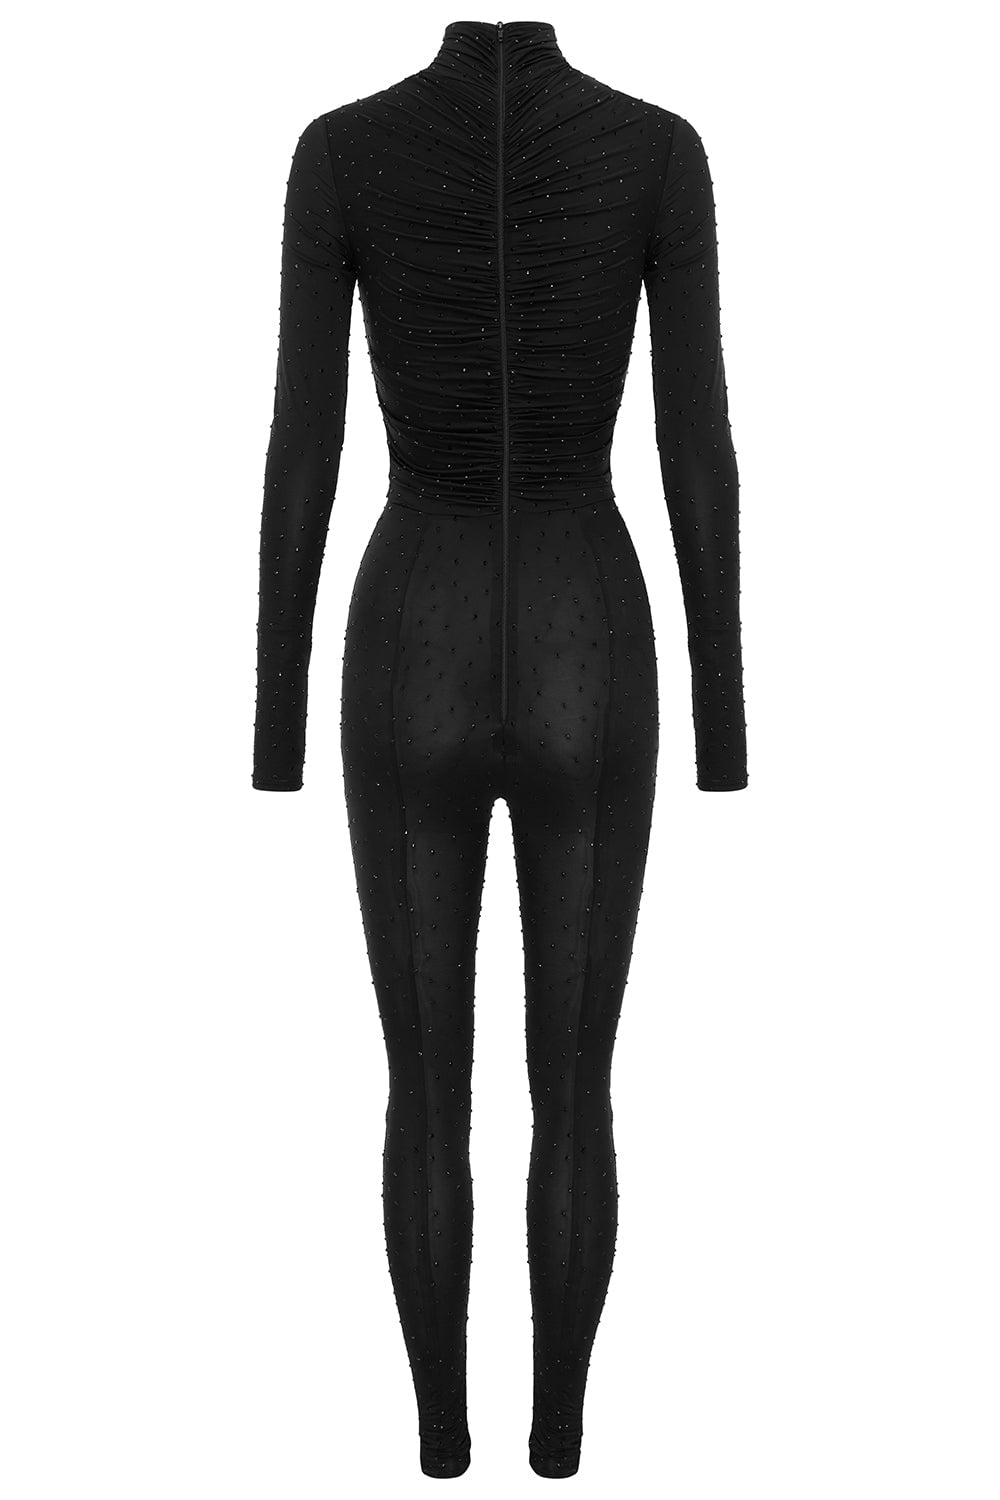 ALEX PERRY-Cove Catsuit-